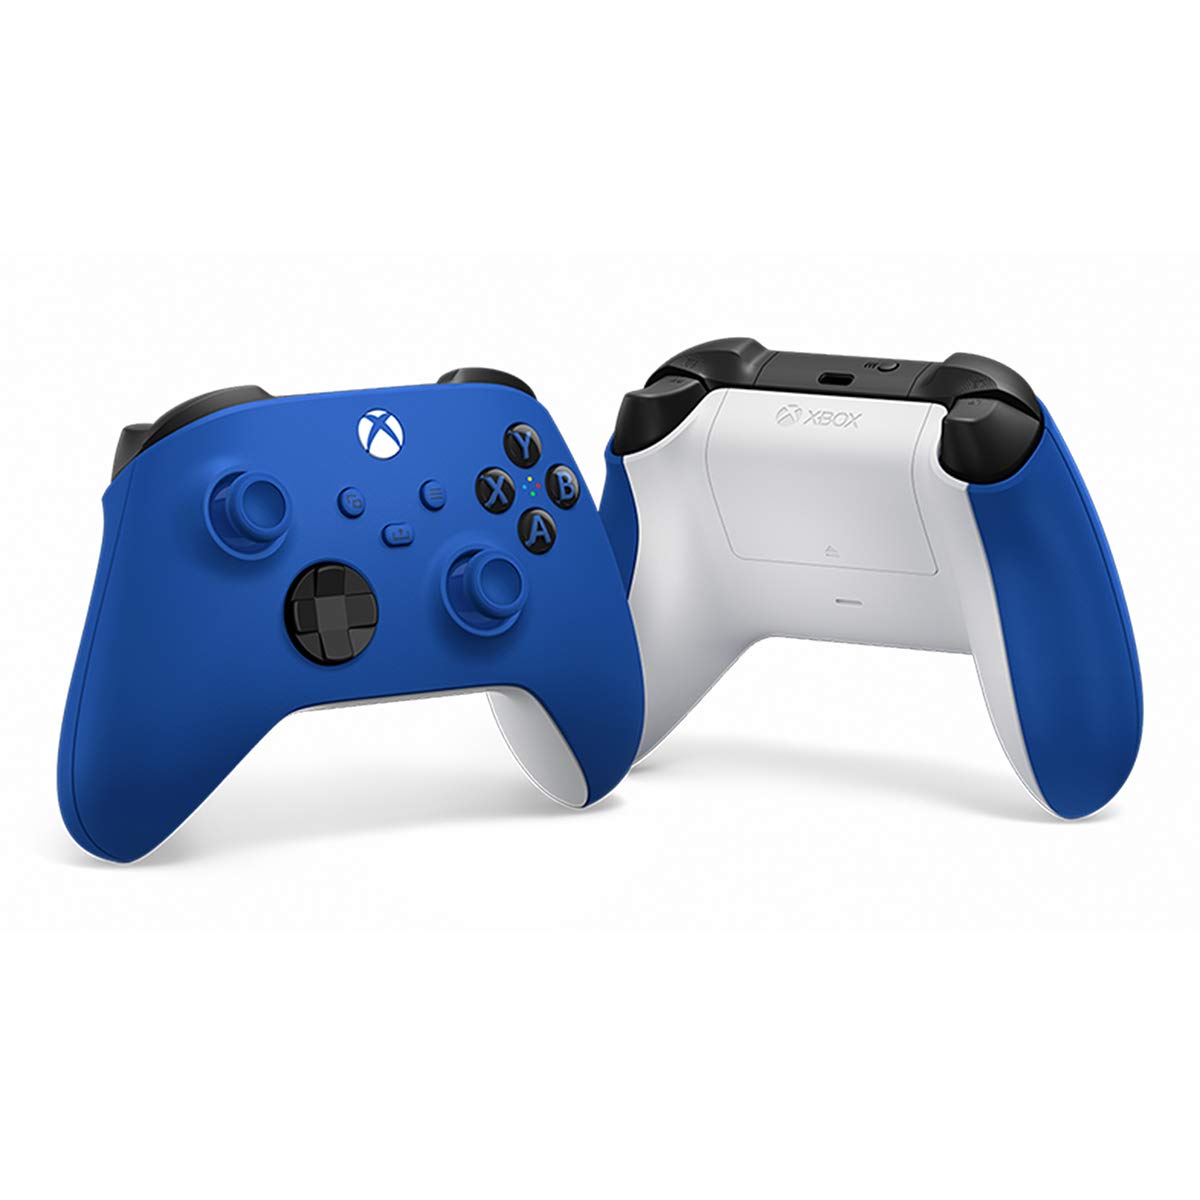 My search for the ultimate PC gaming controller is over